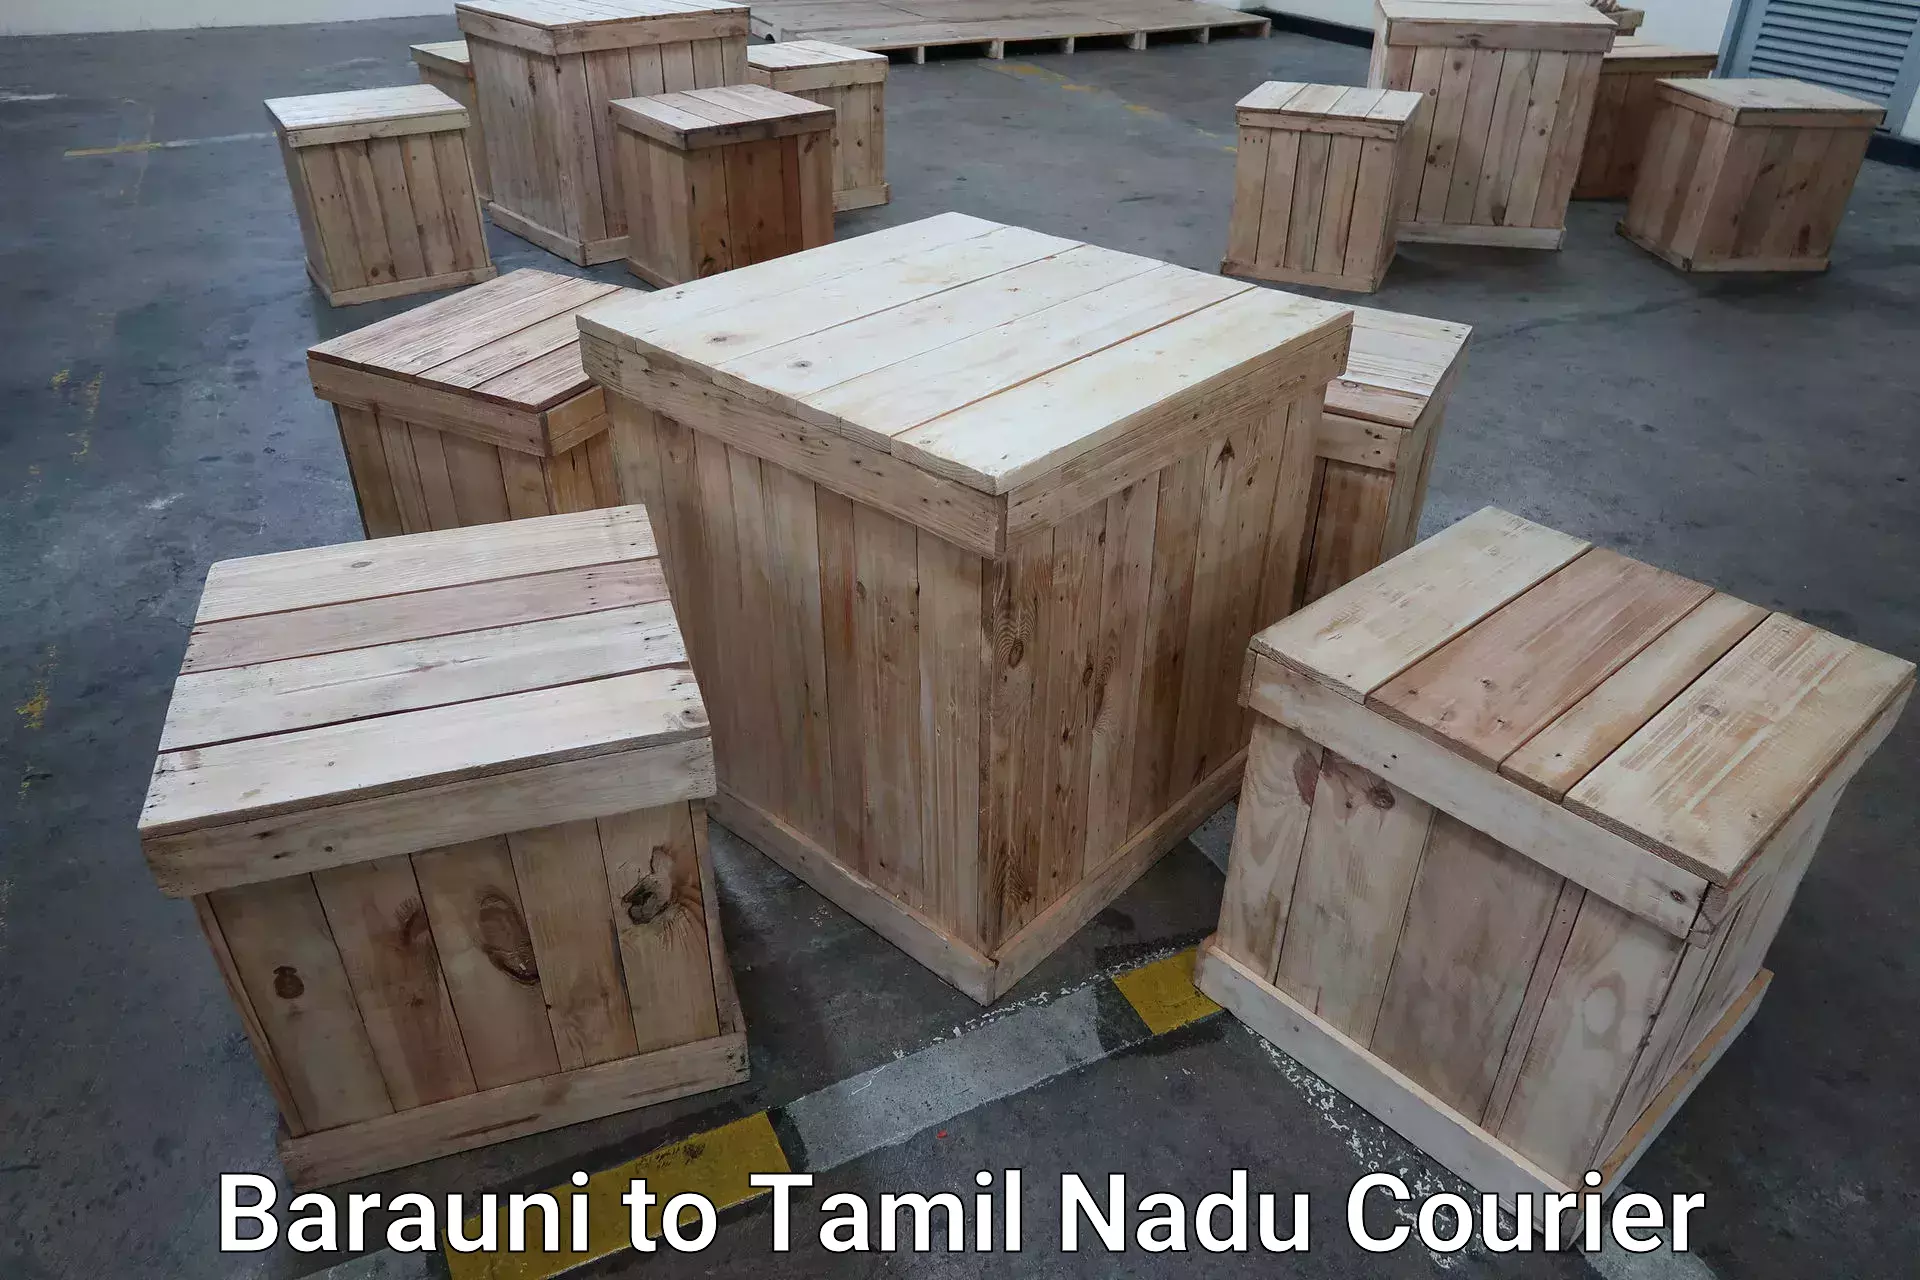 Personal effects shipping in Barauni to Tuticorin Port